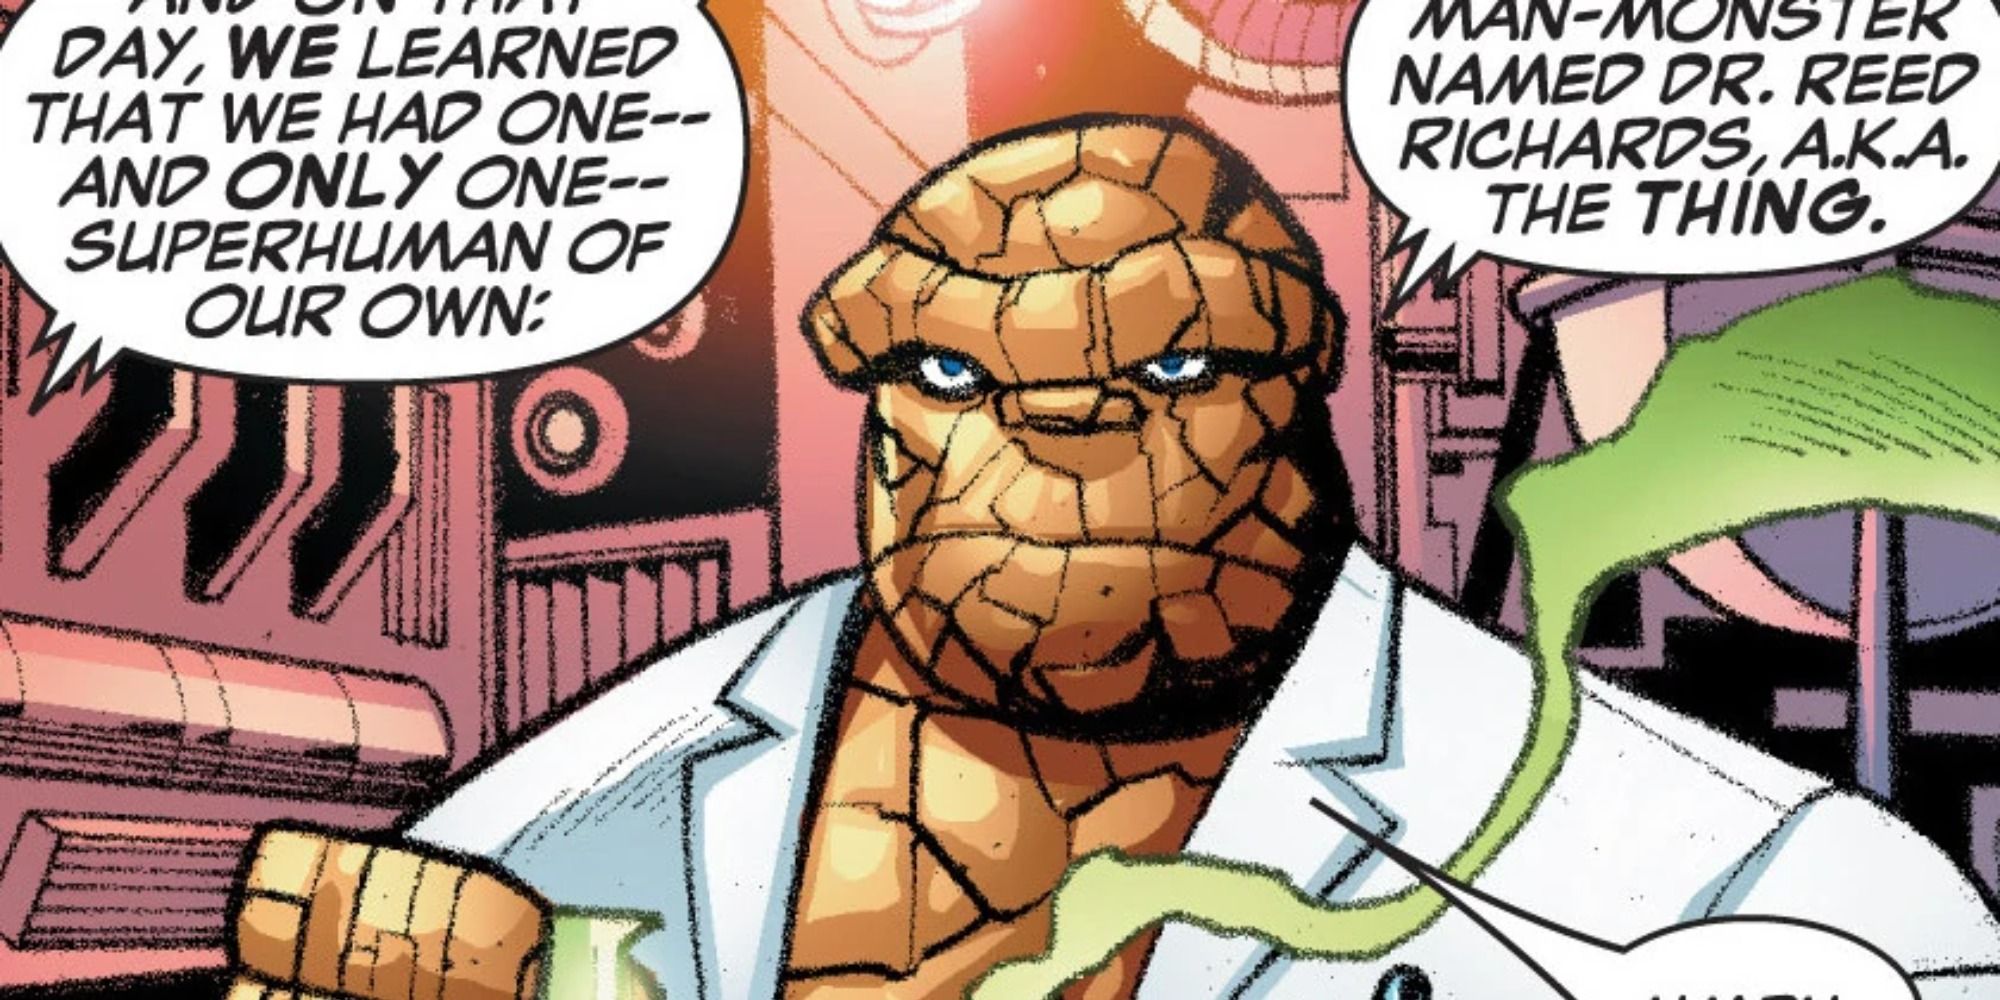 Reed Richards becomes The Thing in Marvel Comics.